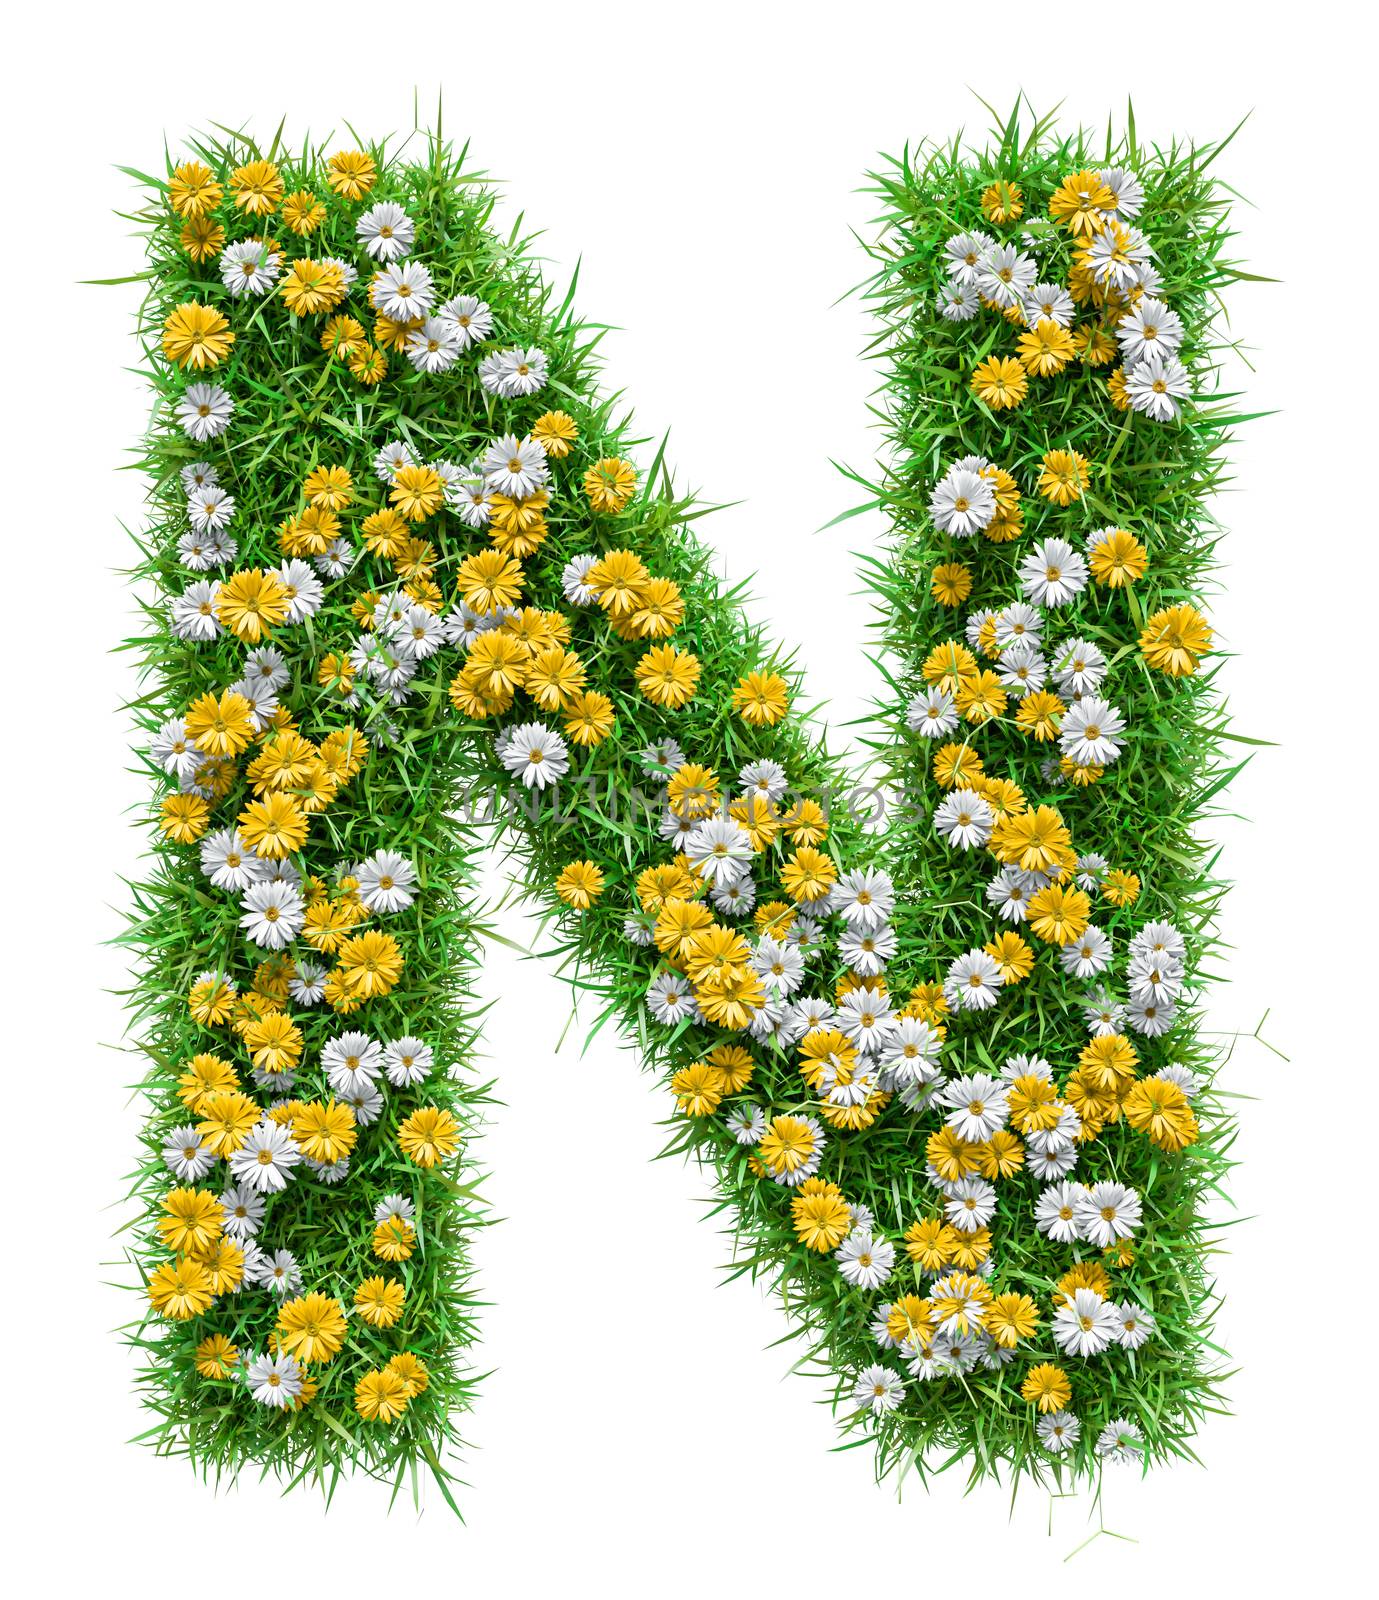 Letter N Of Green Grass And Flowers by cherezoff